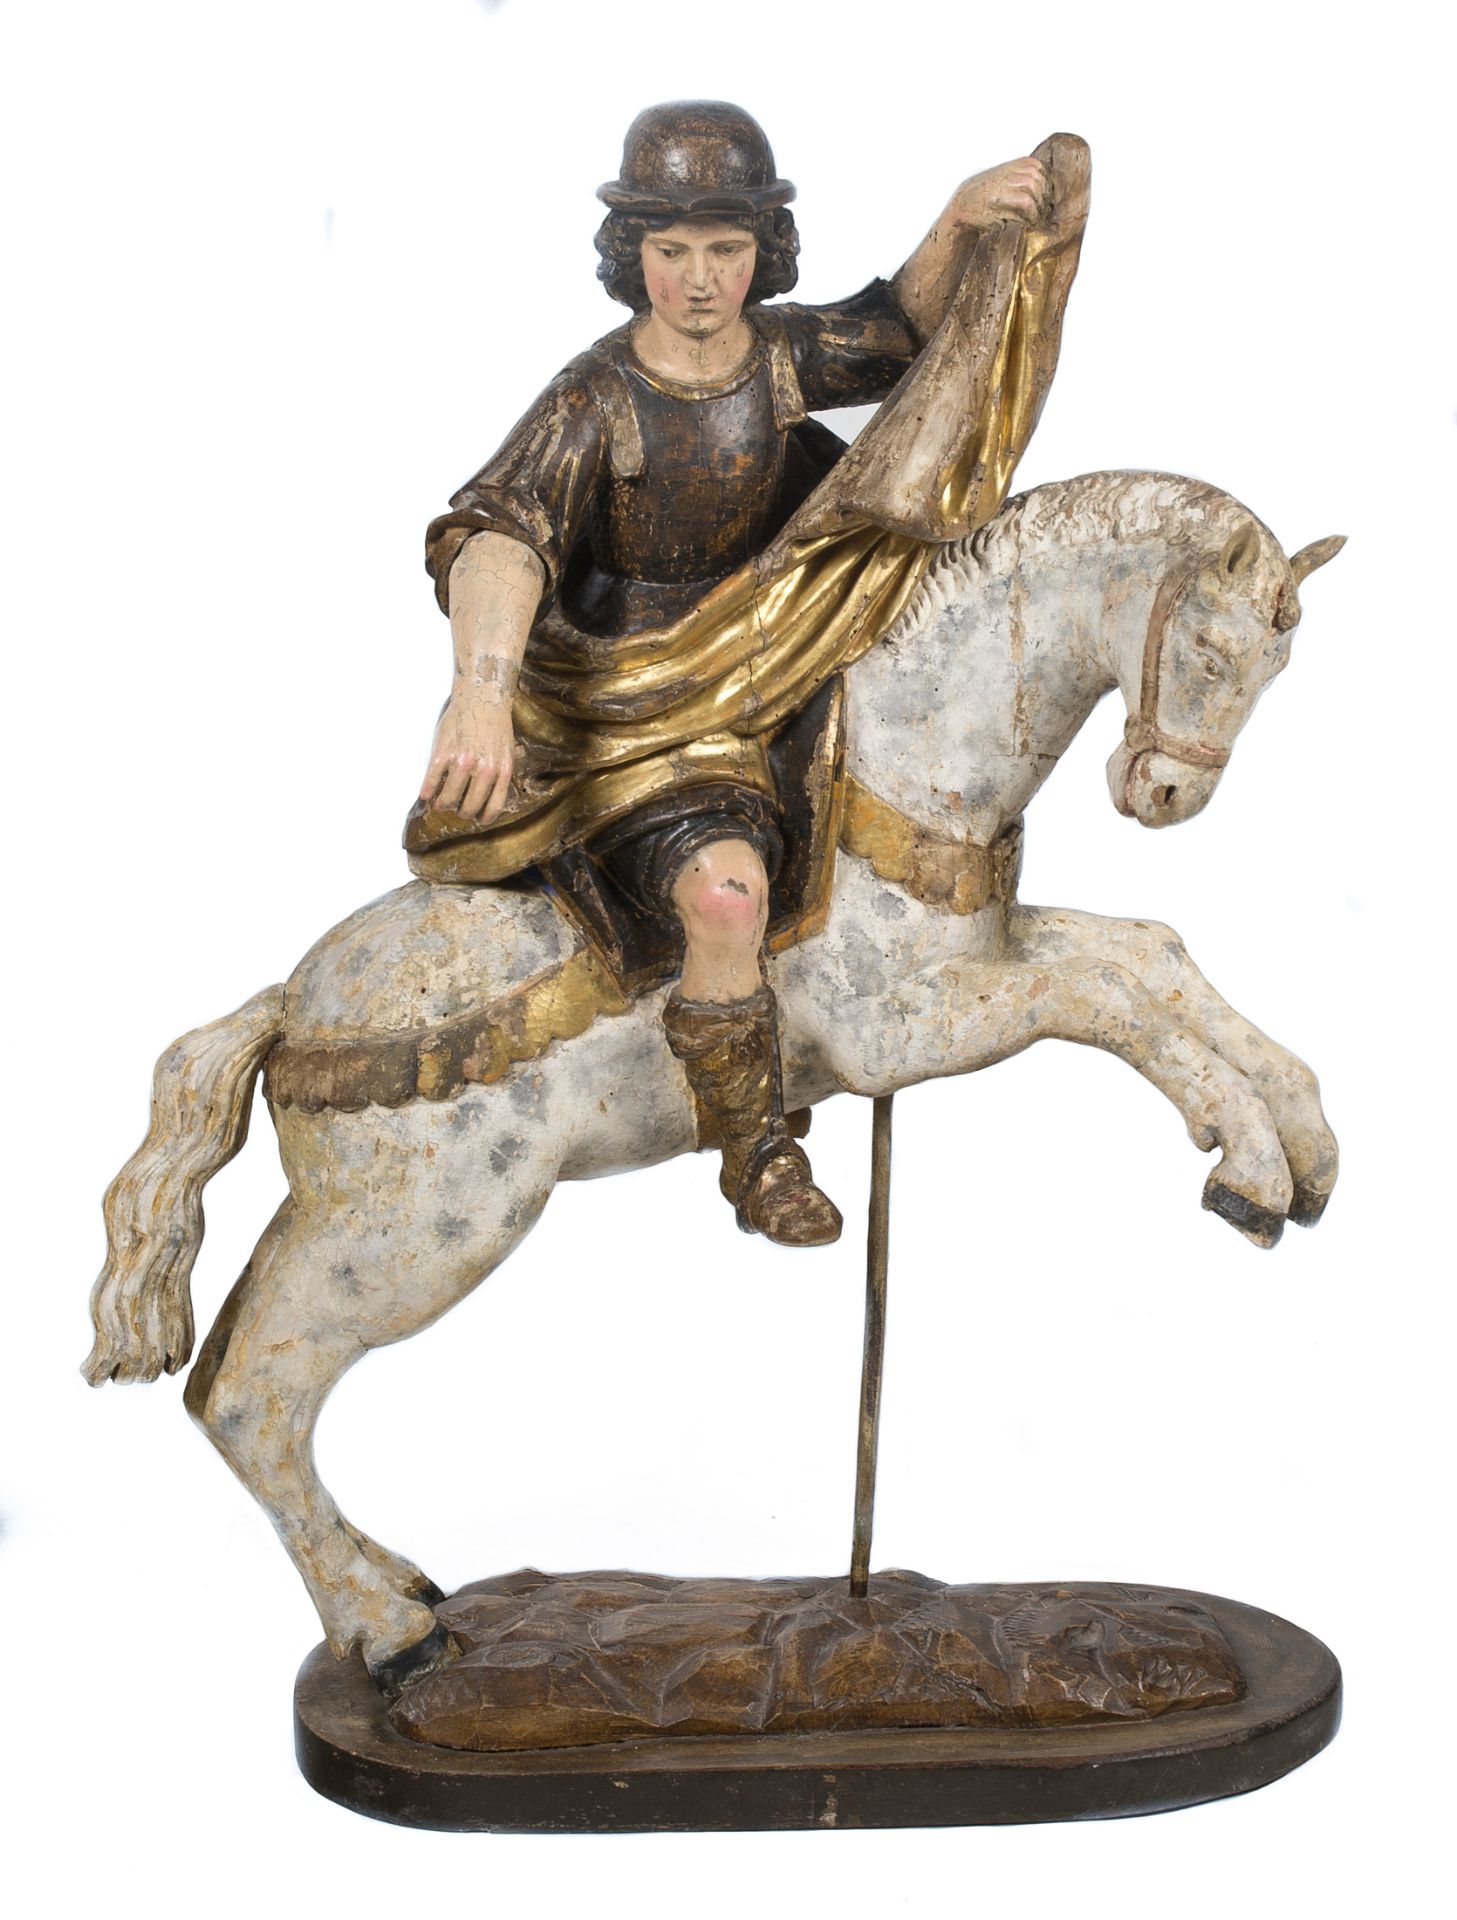 "San Martín". Carved, gilded and polychromed wooden sculpture. Colonial School. 17th century.